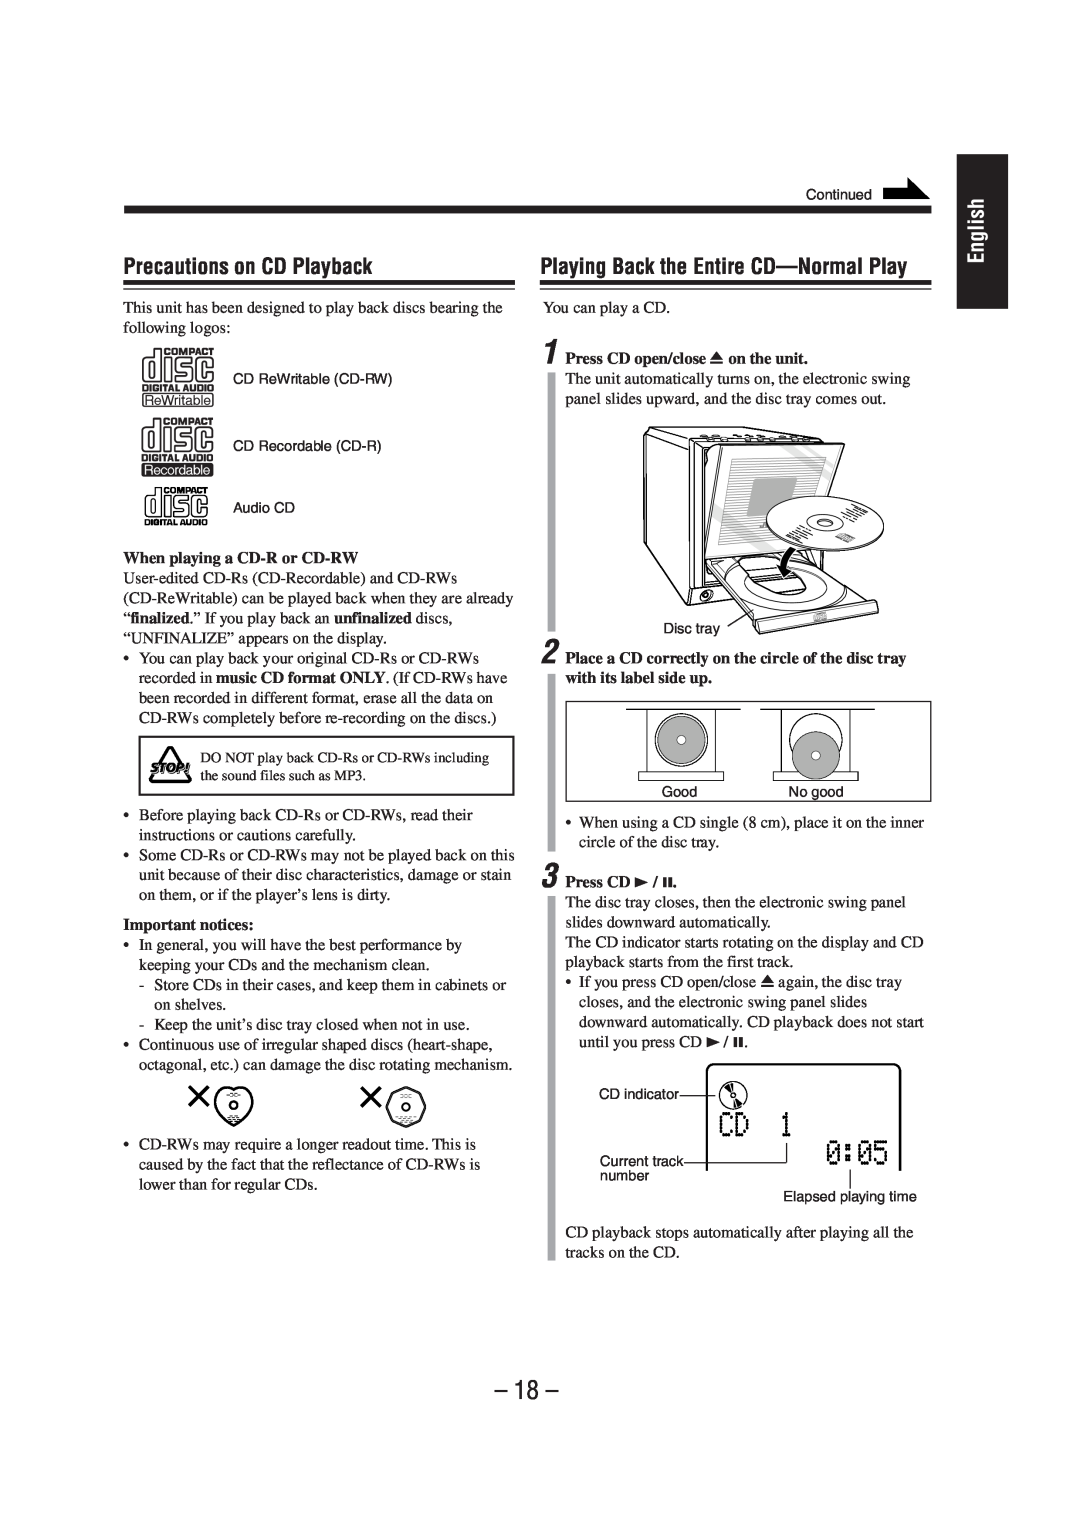 JVC UX-A52 manual Precautions on CD Playback, English, Playing Back the Entire CD-NormalPlay 